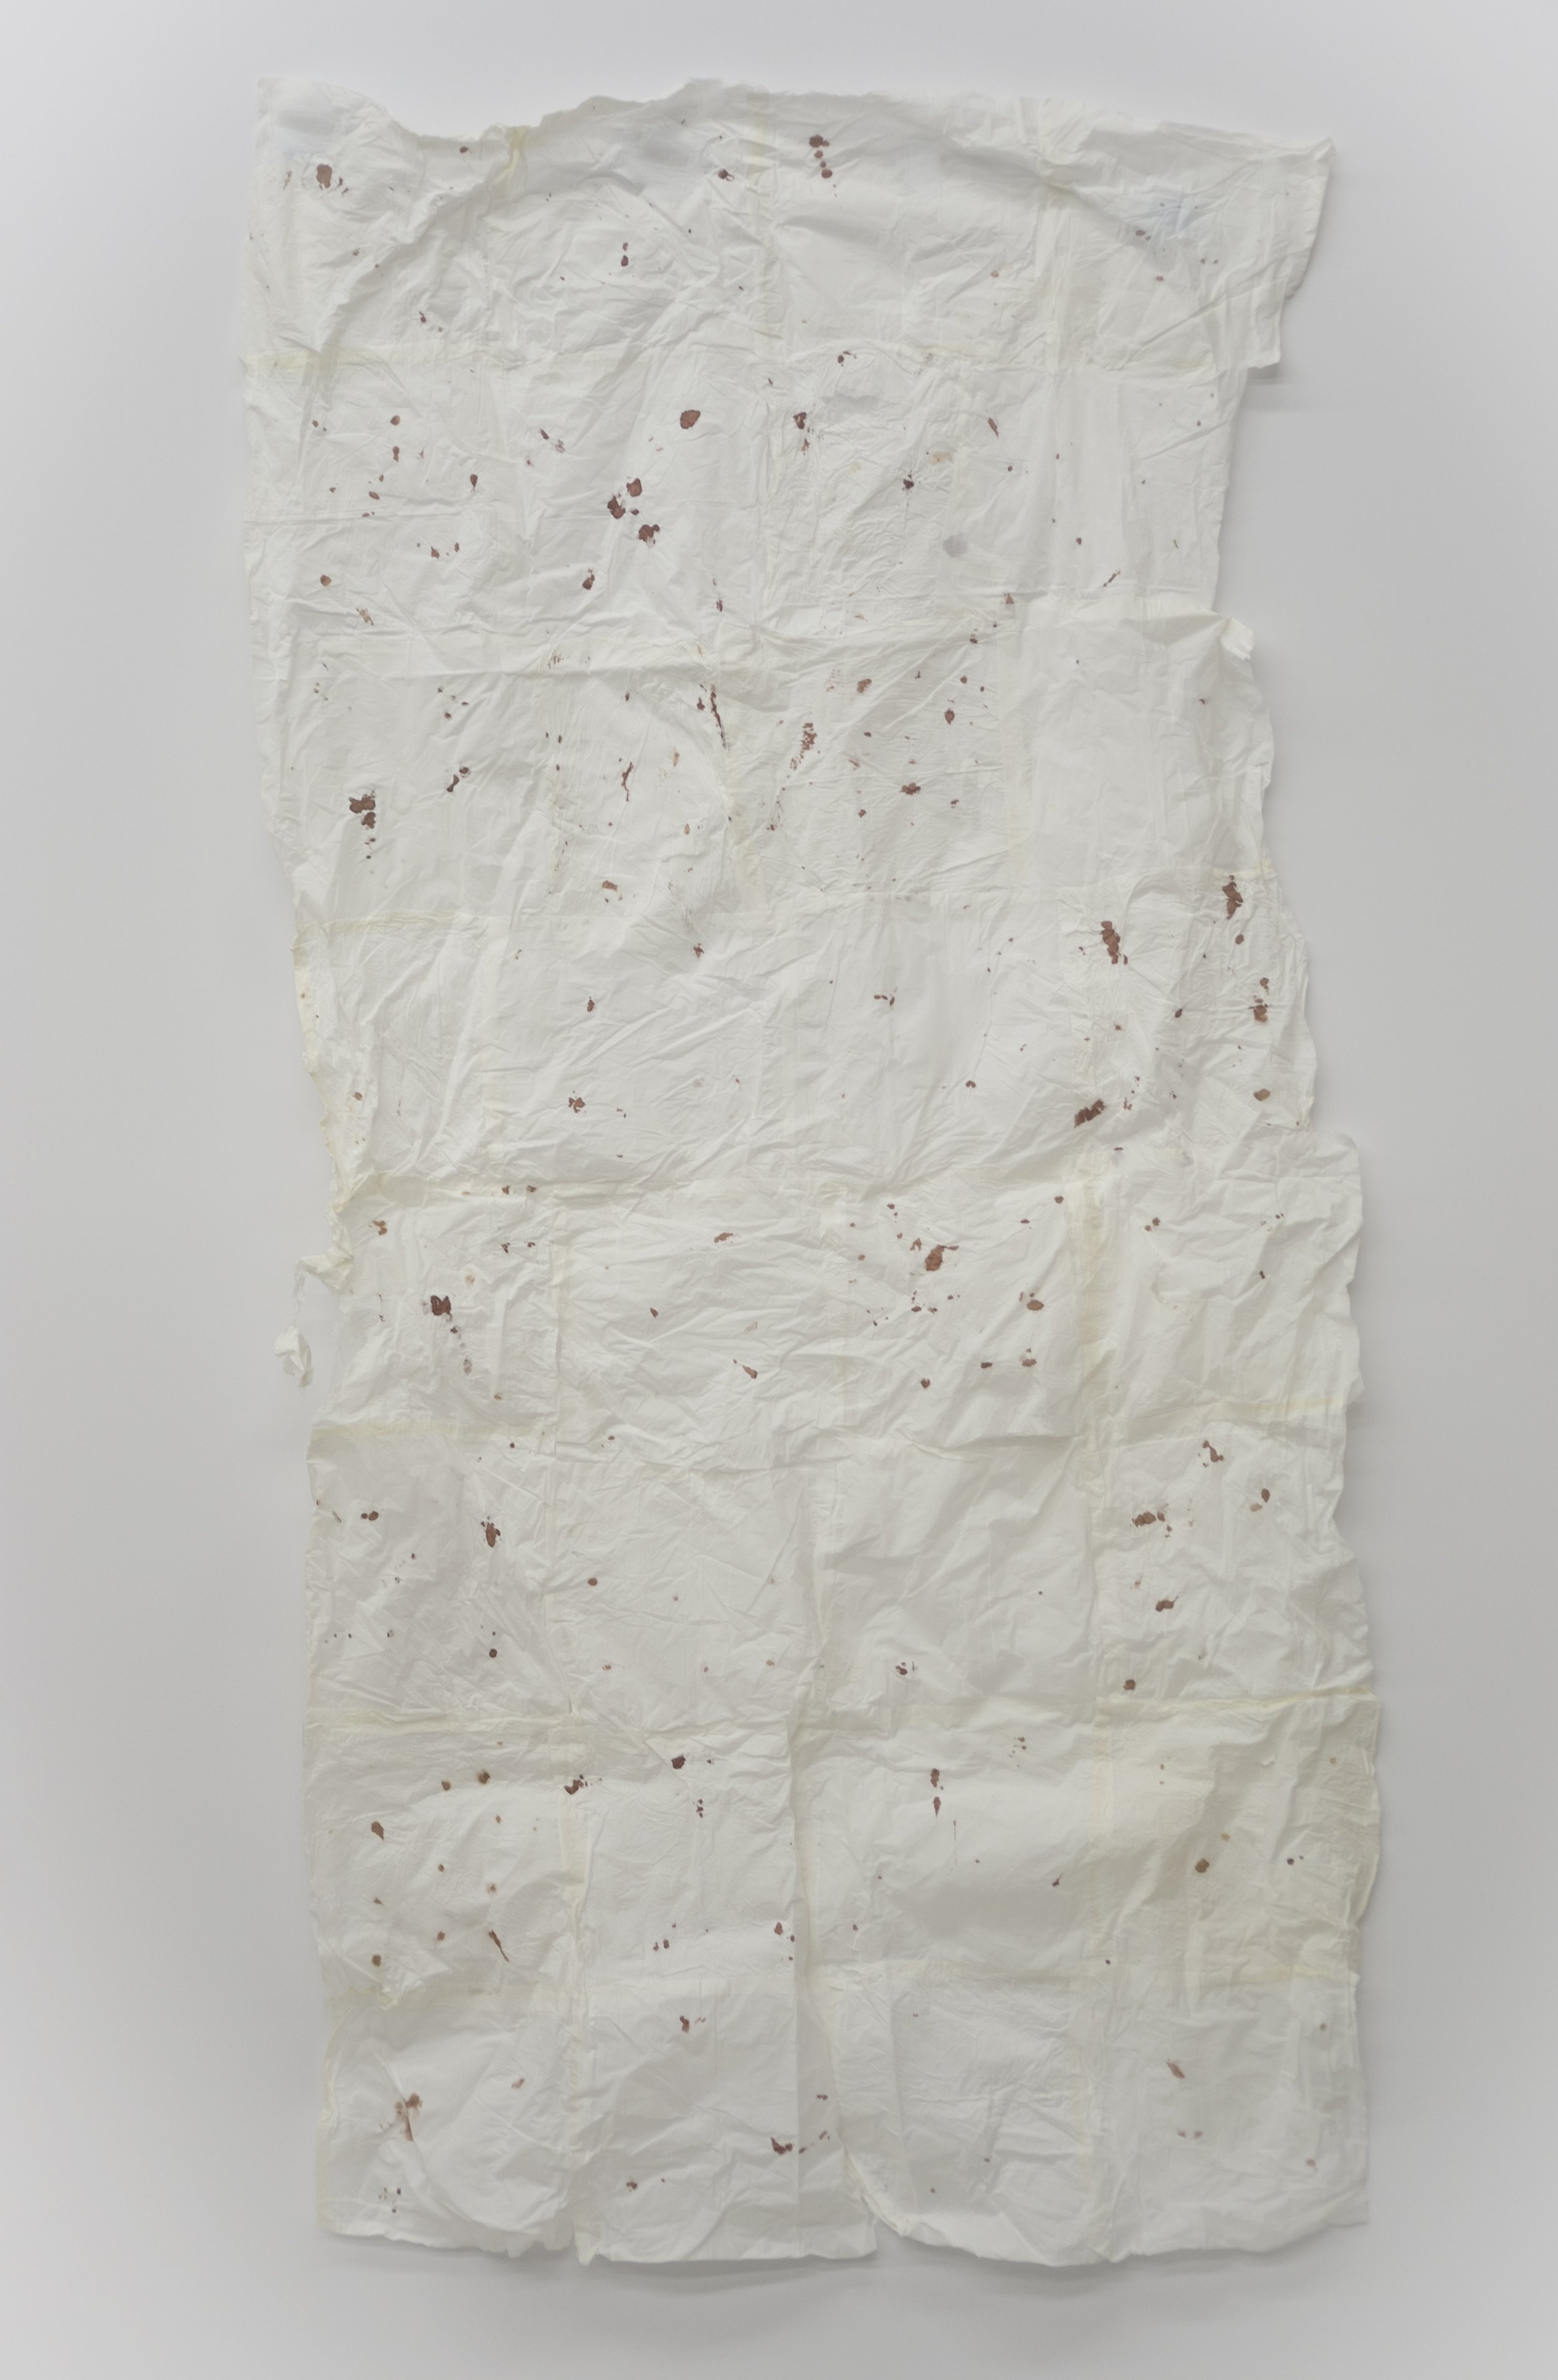  5’x3’ tapestry created from tissues with blood 